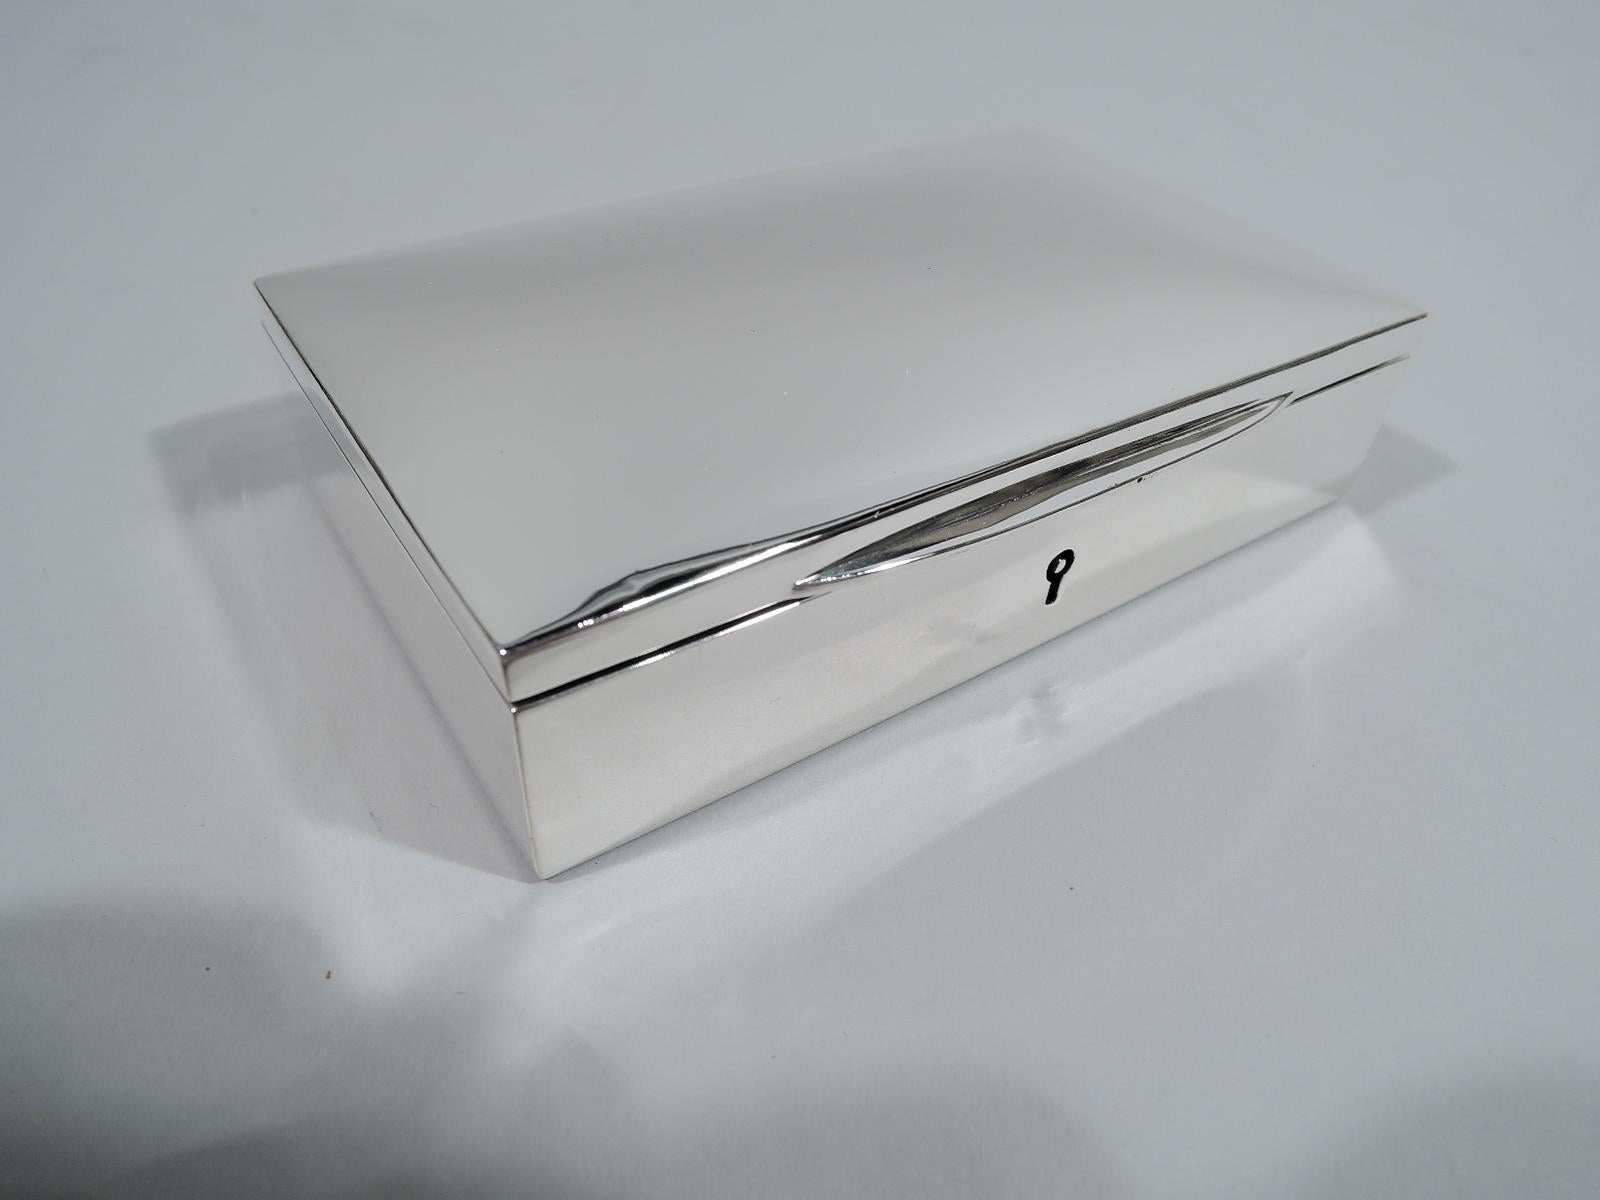 Modern sterling silver box, ca 1920. Retailed by JE Caldwell in Philadelphia. Rectangular with straight sides. Cover hinged and gently curved with tapering tab. A handy and stylish receptacle for desk detritus. Fully marked including New York